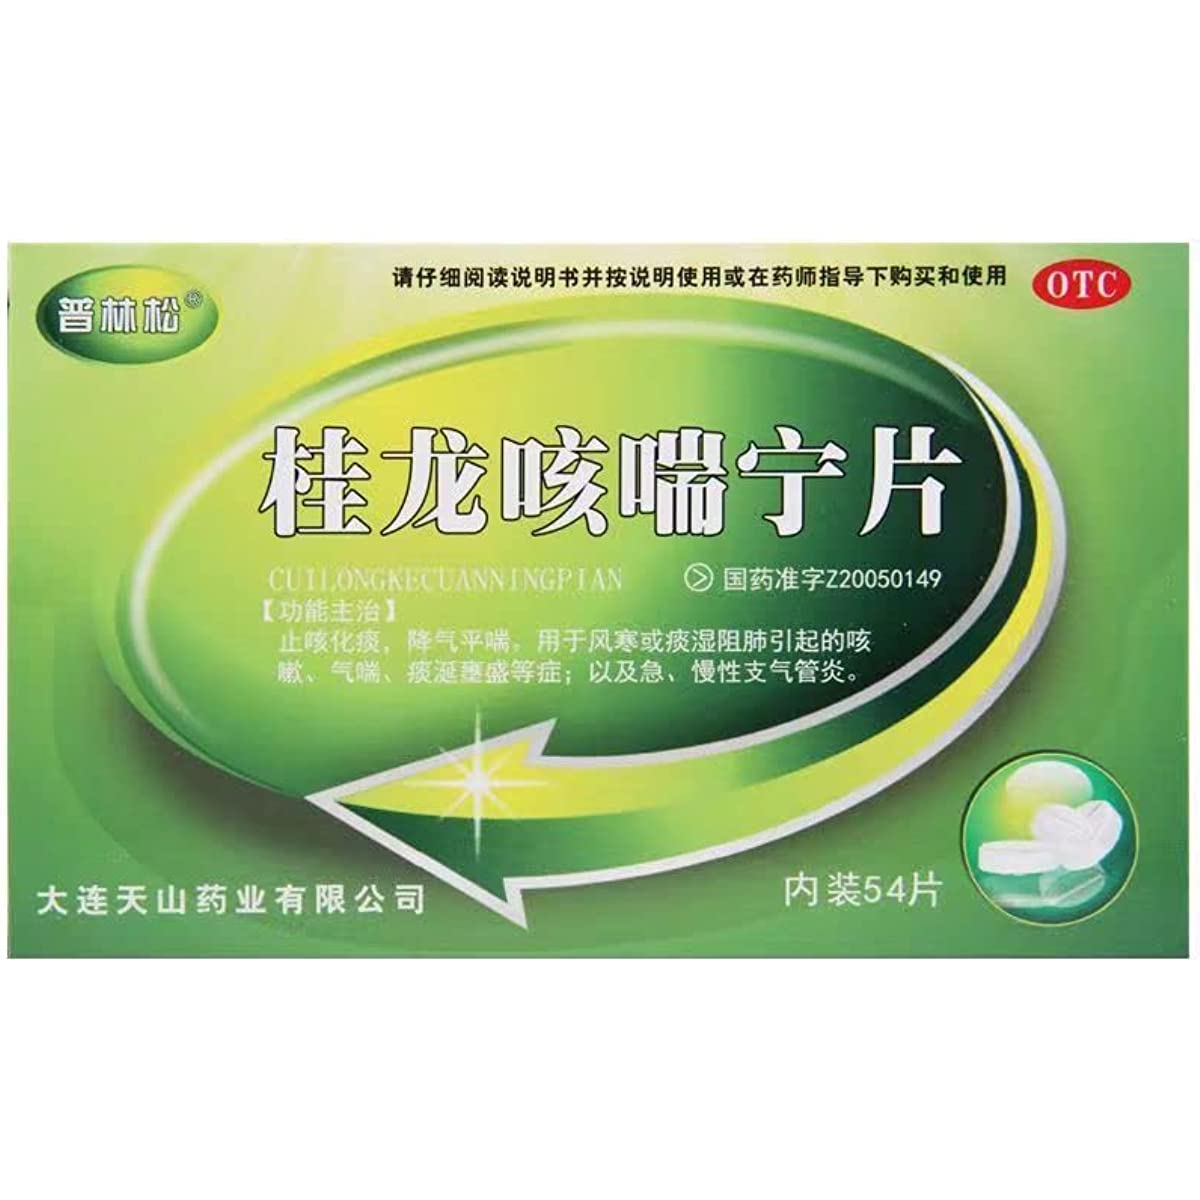 2 Boxes (54 Tablets / Box) GuilongKechuanningPian （桂龙咳喘宁片 54片/盒）